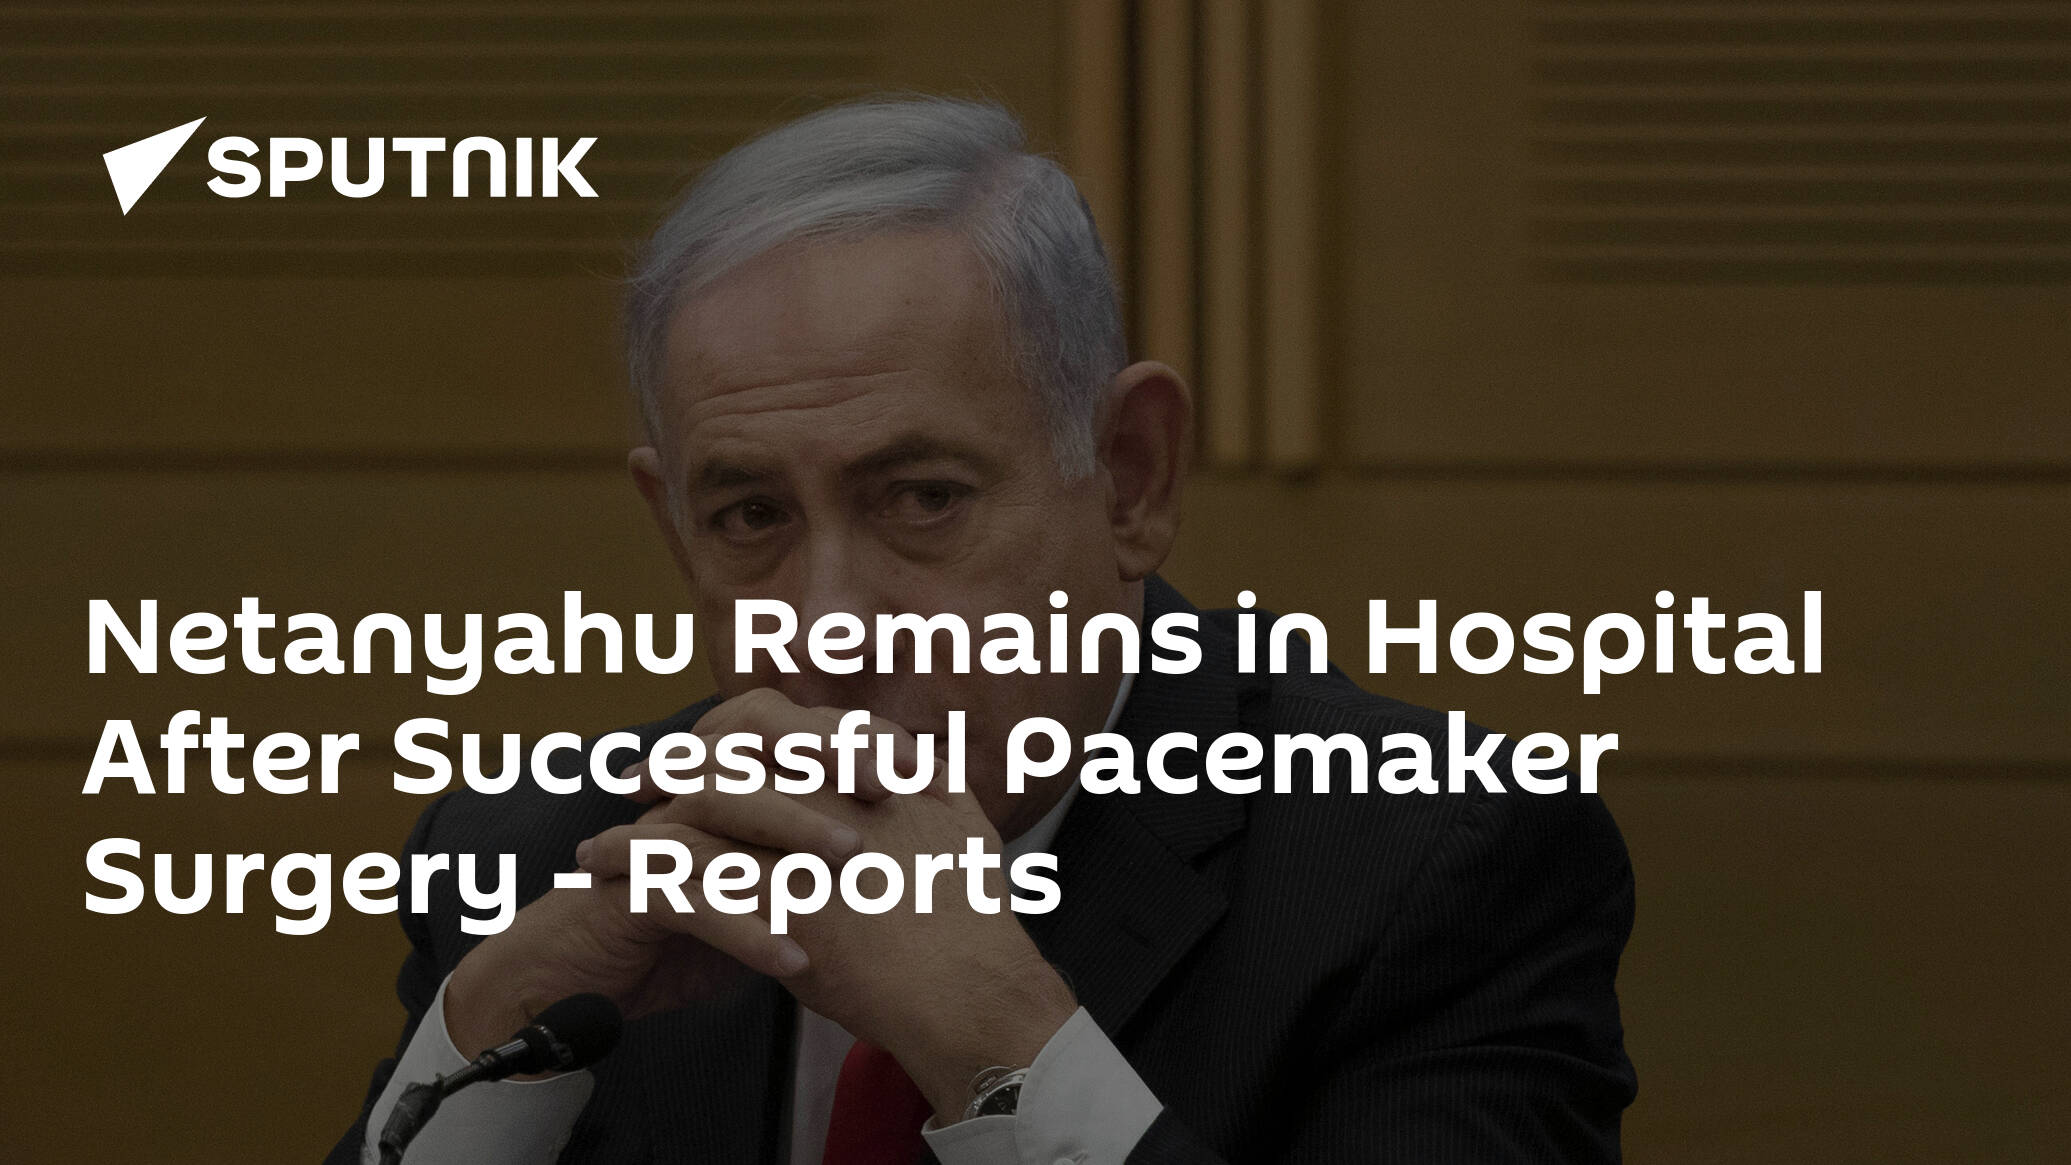 Netanyahu Remains in Hospital After Successful Pacemaker Surgery – Reports